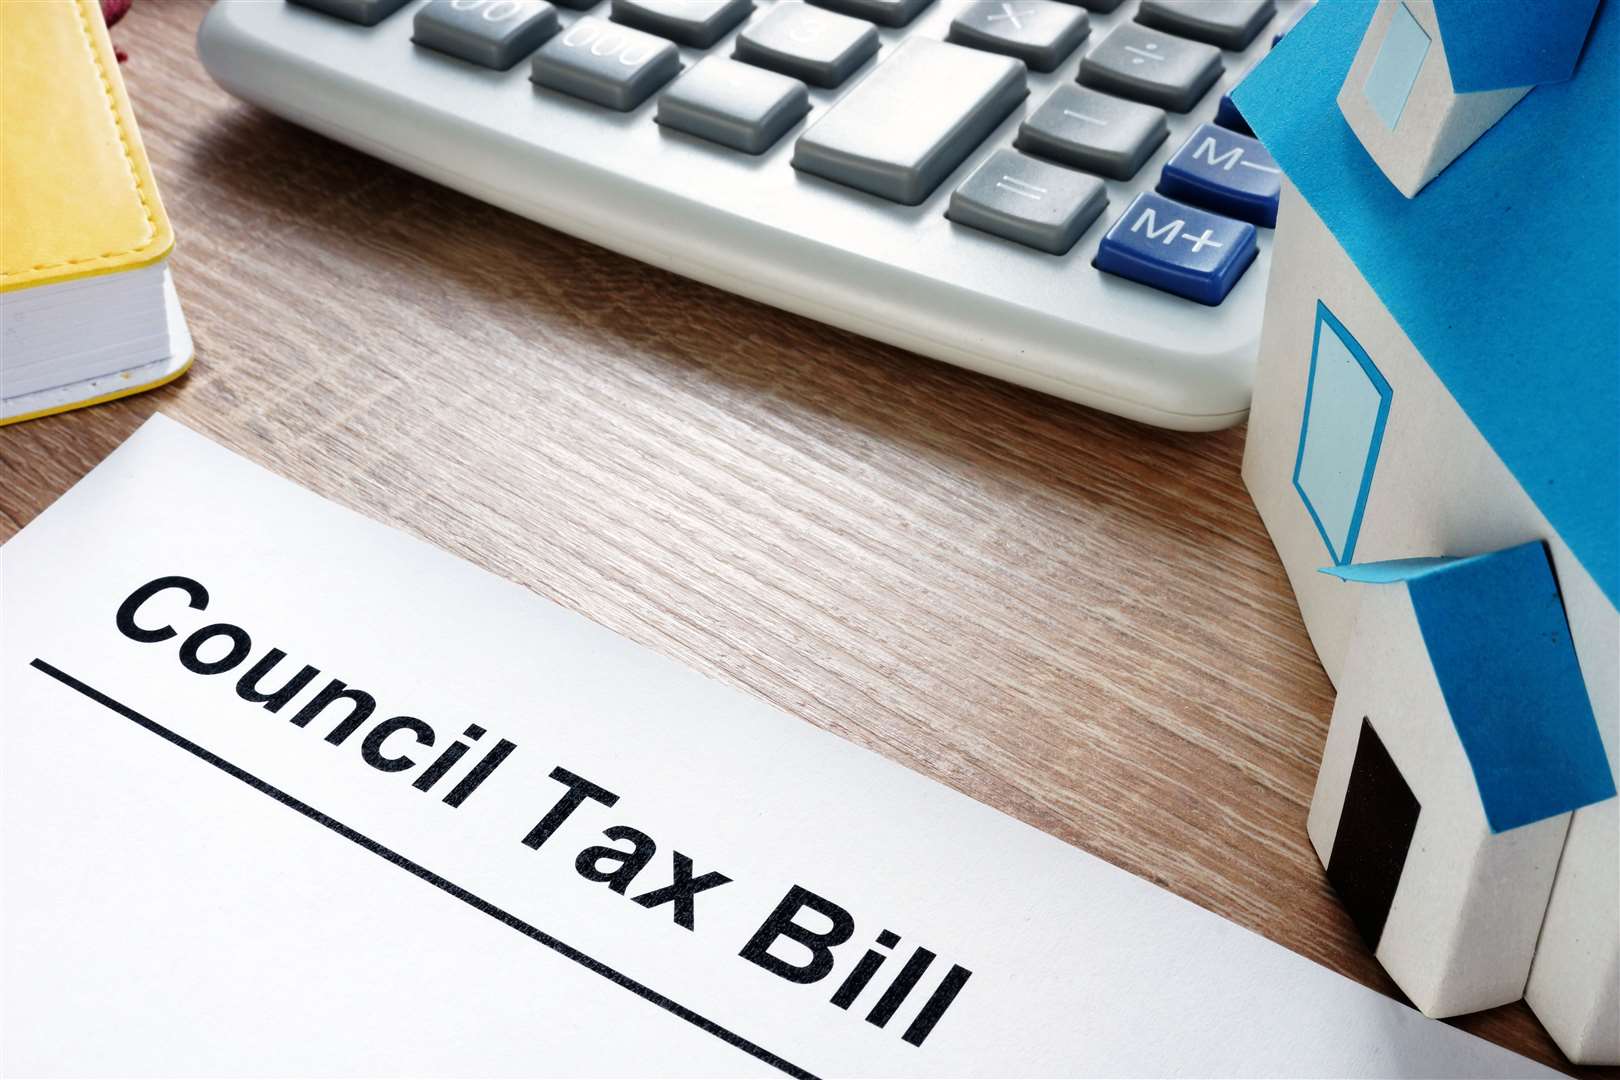 A consultation has opened on proposed changes to council tax bills.